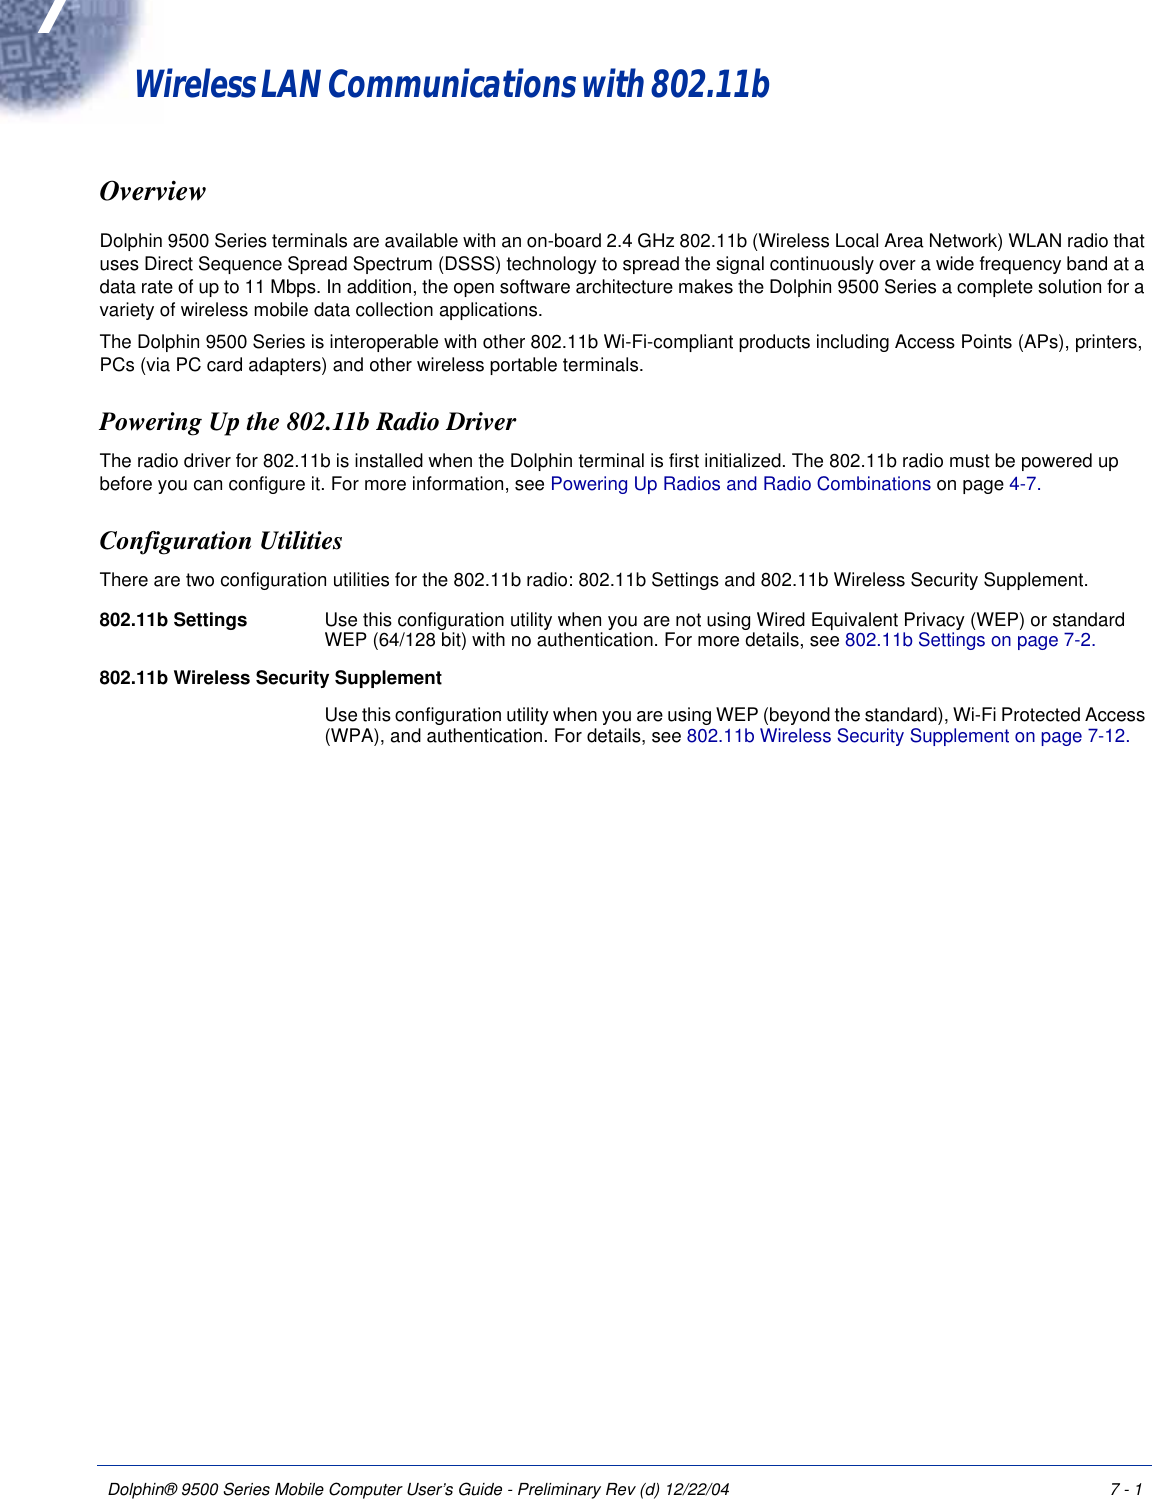 Dolphin® 9500 Series Mobile Computer User’s Guide - Preliminary Rev (d) 12/22/04 7 - 17Wireless LAN Communications with 802.11b OverviewDolphin 9500 Series terminals are available with an on-board 2.4 GHz 802.11b (Wireless Local Area Network) WLAN radio that uses Direct Sequence Spread Spectrum (DSSS) technology to spread the signal continuously over a wide frequency band at a data rate of up to 11 Mbps. In addition, the open software architecture makes the Dolphin 9500 Series a complete solution for a variety of wireless mobile data collection applications.The Dolphin 9500 Series is interoperable with other 802.11b Wi-Fi-compliant products including Access Points (APs), printers, PCs (via PC card adapters) and other wireless portable terminals.Powering Up the 802.11b Radio DriverThe radio driver for 802.11b is installed when the Dolphin terminal is first initialized. The 802.11b radio must be powered up before you can configure it. For more information, see Powering Up Radios and Radio Combinations on page 4-7.Configuration UtilitiesThere are two configuration utilities for the 802.11b radio: 802.11b Settings and 802.11b Wireless Security Supplement.802.11b Settings Use this configuration utility when you are not using Wired Equivalent Privacy (WEP) or standard WEP (64/128 bit) with no authentication. For more details, see 802.11b Settings on page 7-2.802.11b Wireless Security SupplementUse this configuration utility when you are using WEP (beyond the standard), Wi-Fi Protected Access (WPA), and authentication. For details, see 802.11b Wireless Security Supplement on page 7-12.